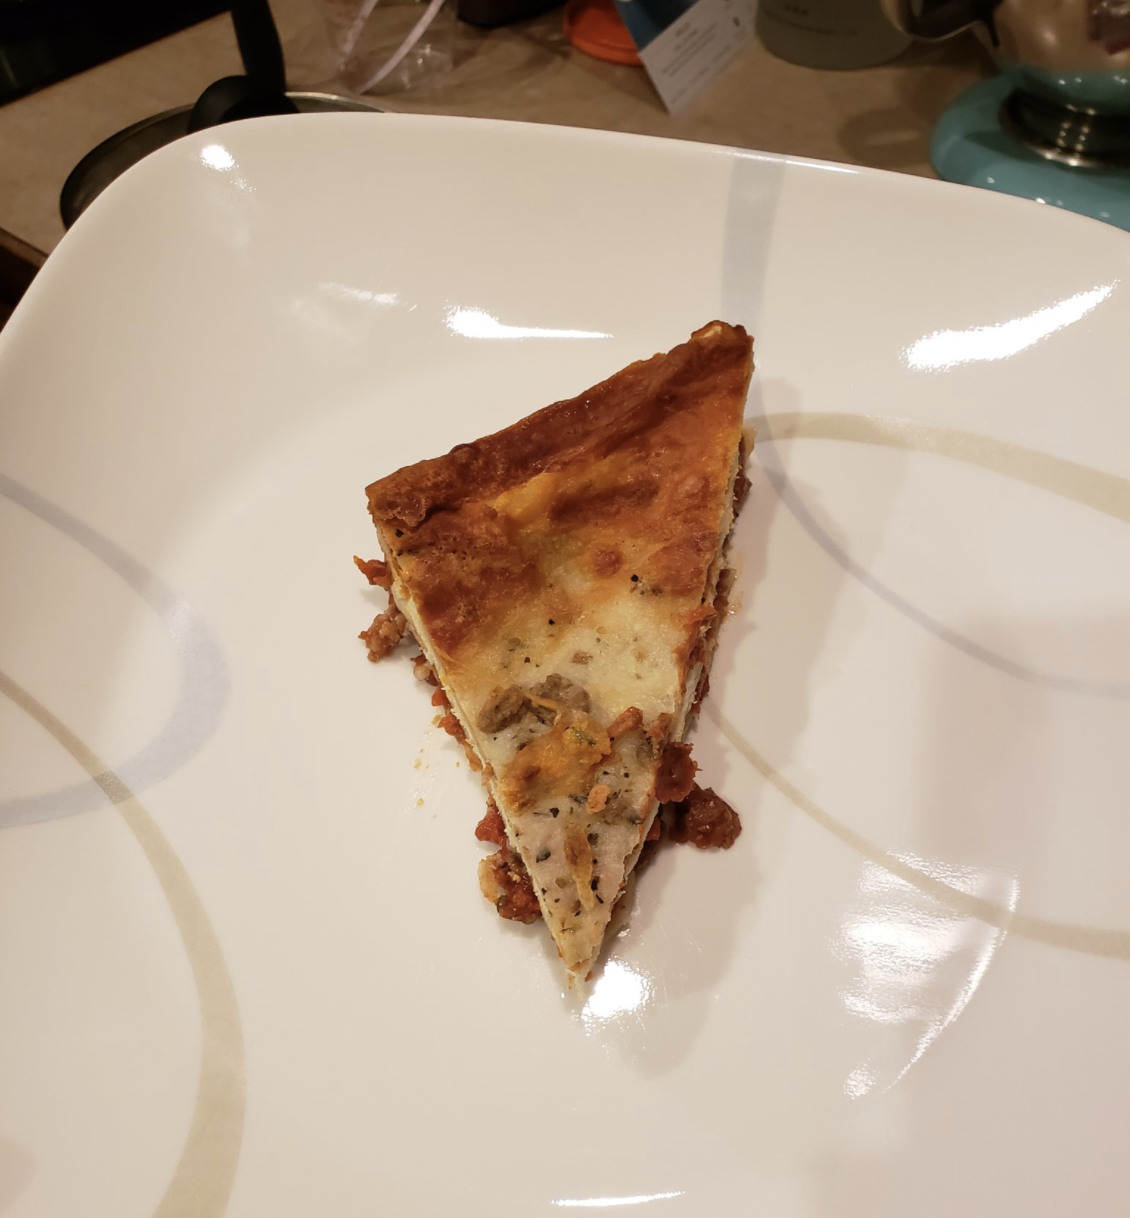 Triangle-shaped piece of lasagna on a plate